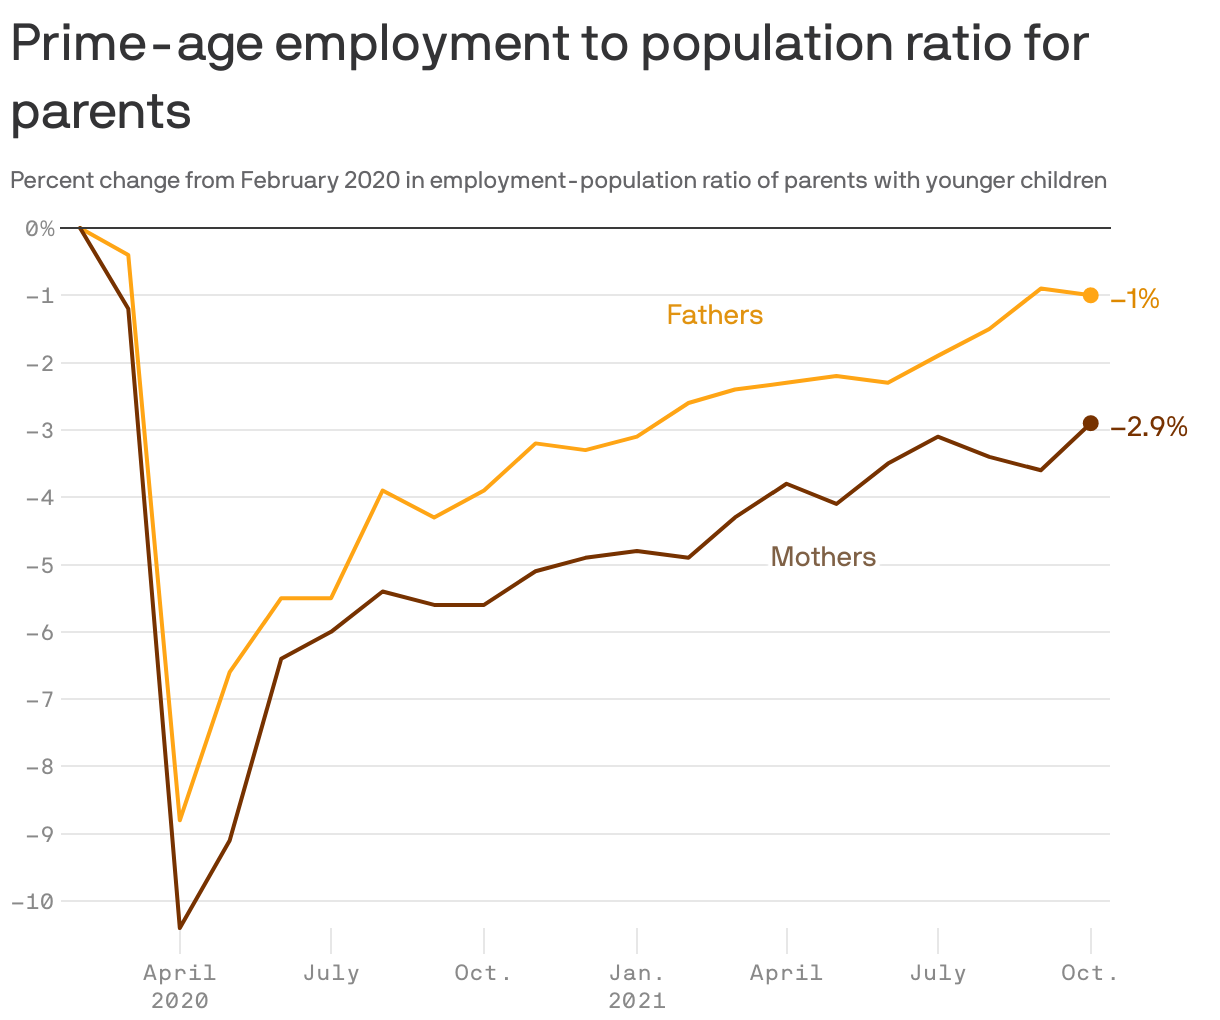 Prime-age employment to population ratio for parents